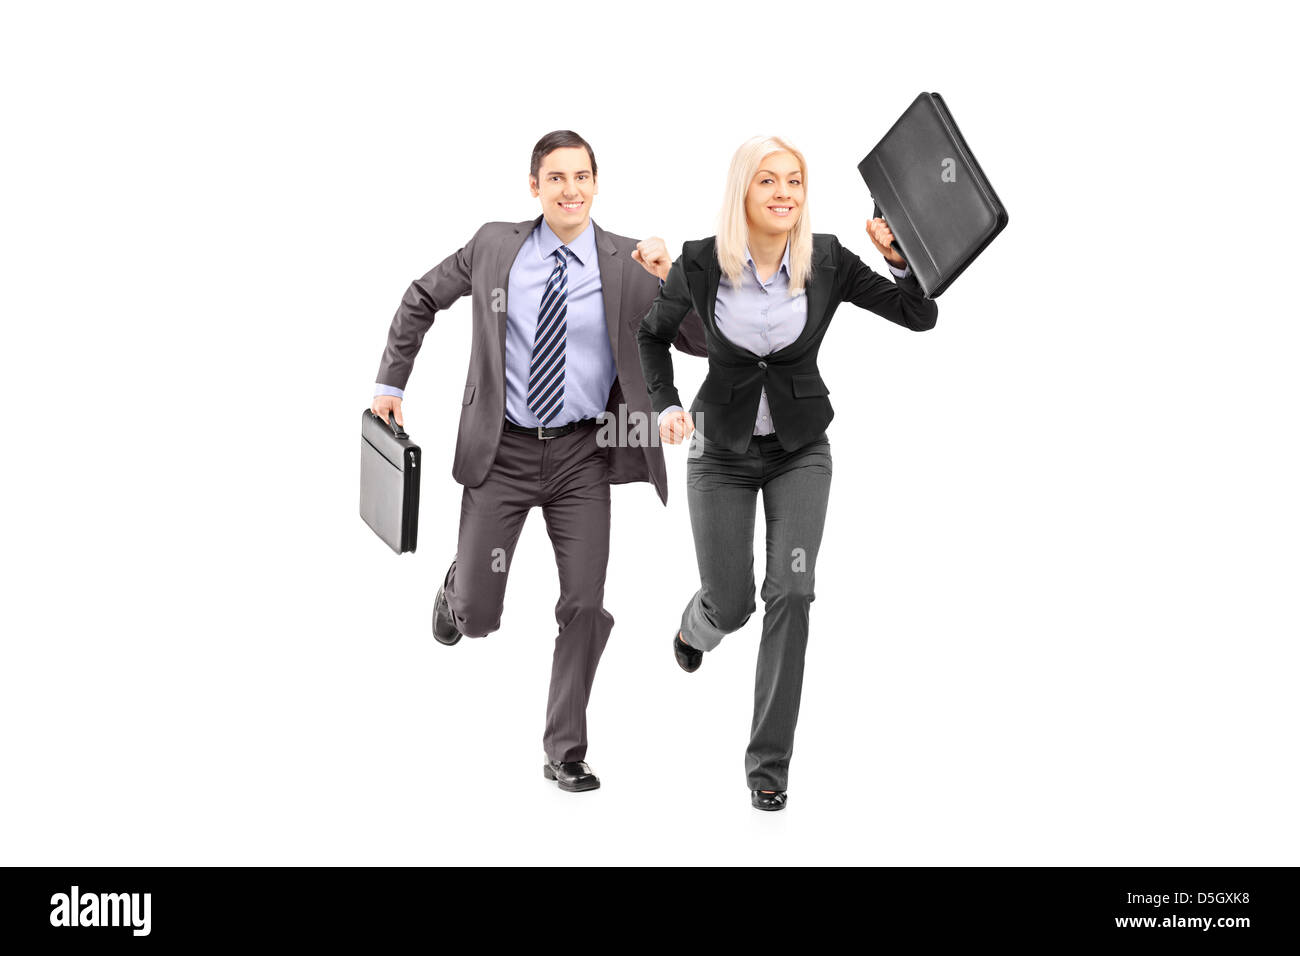 Full length portrait of a businesspeople with briefcases running isolated on white background Stock Photo